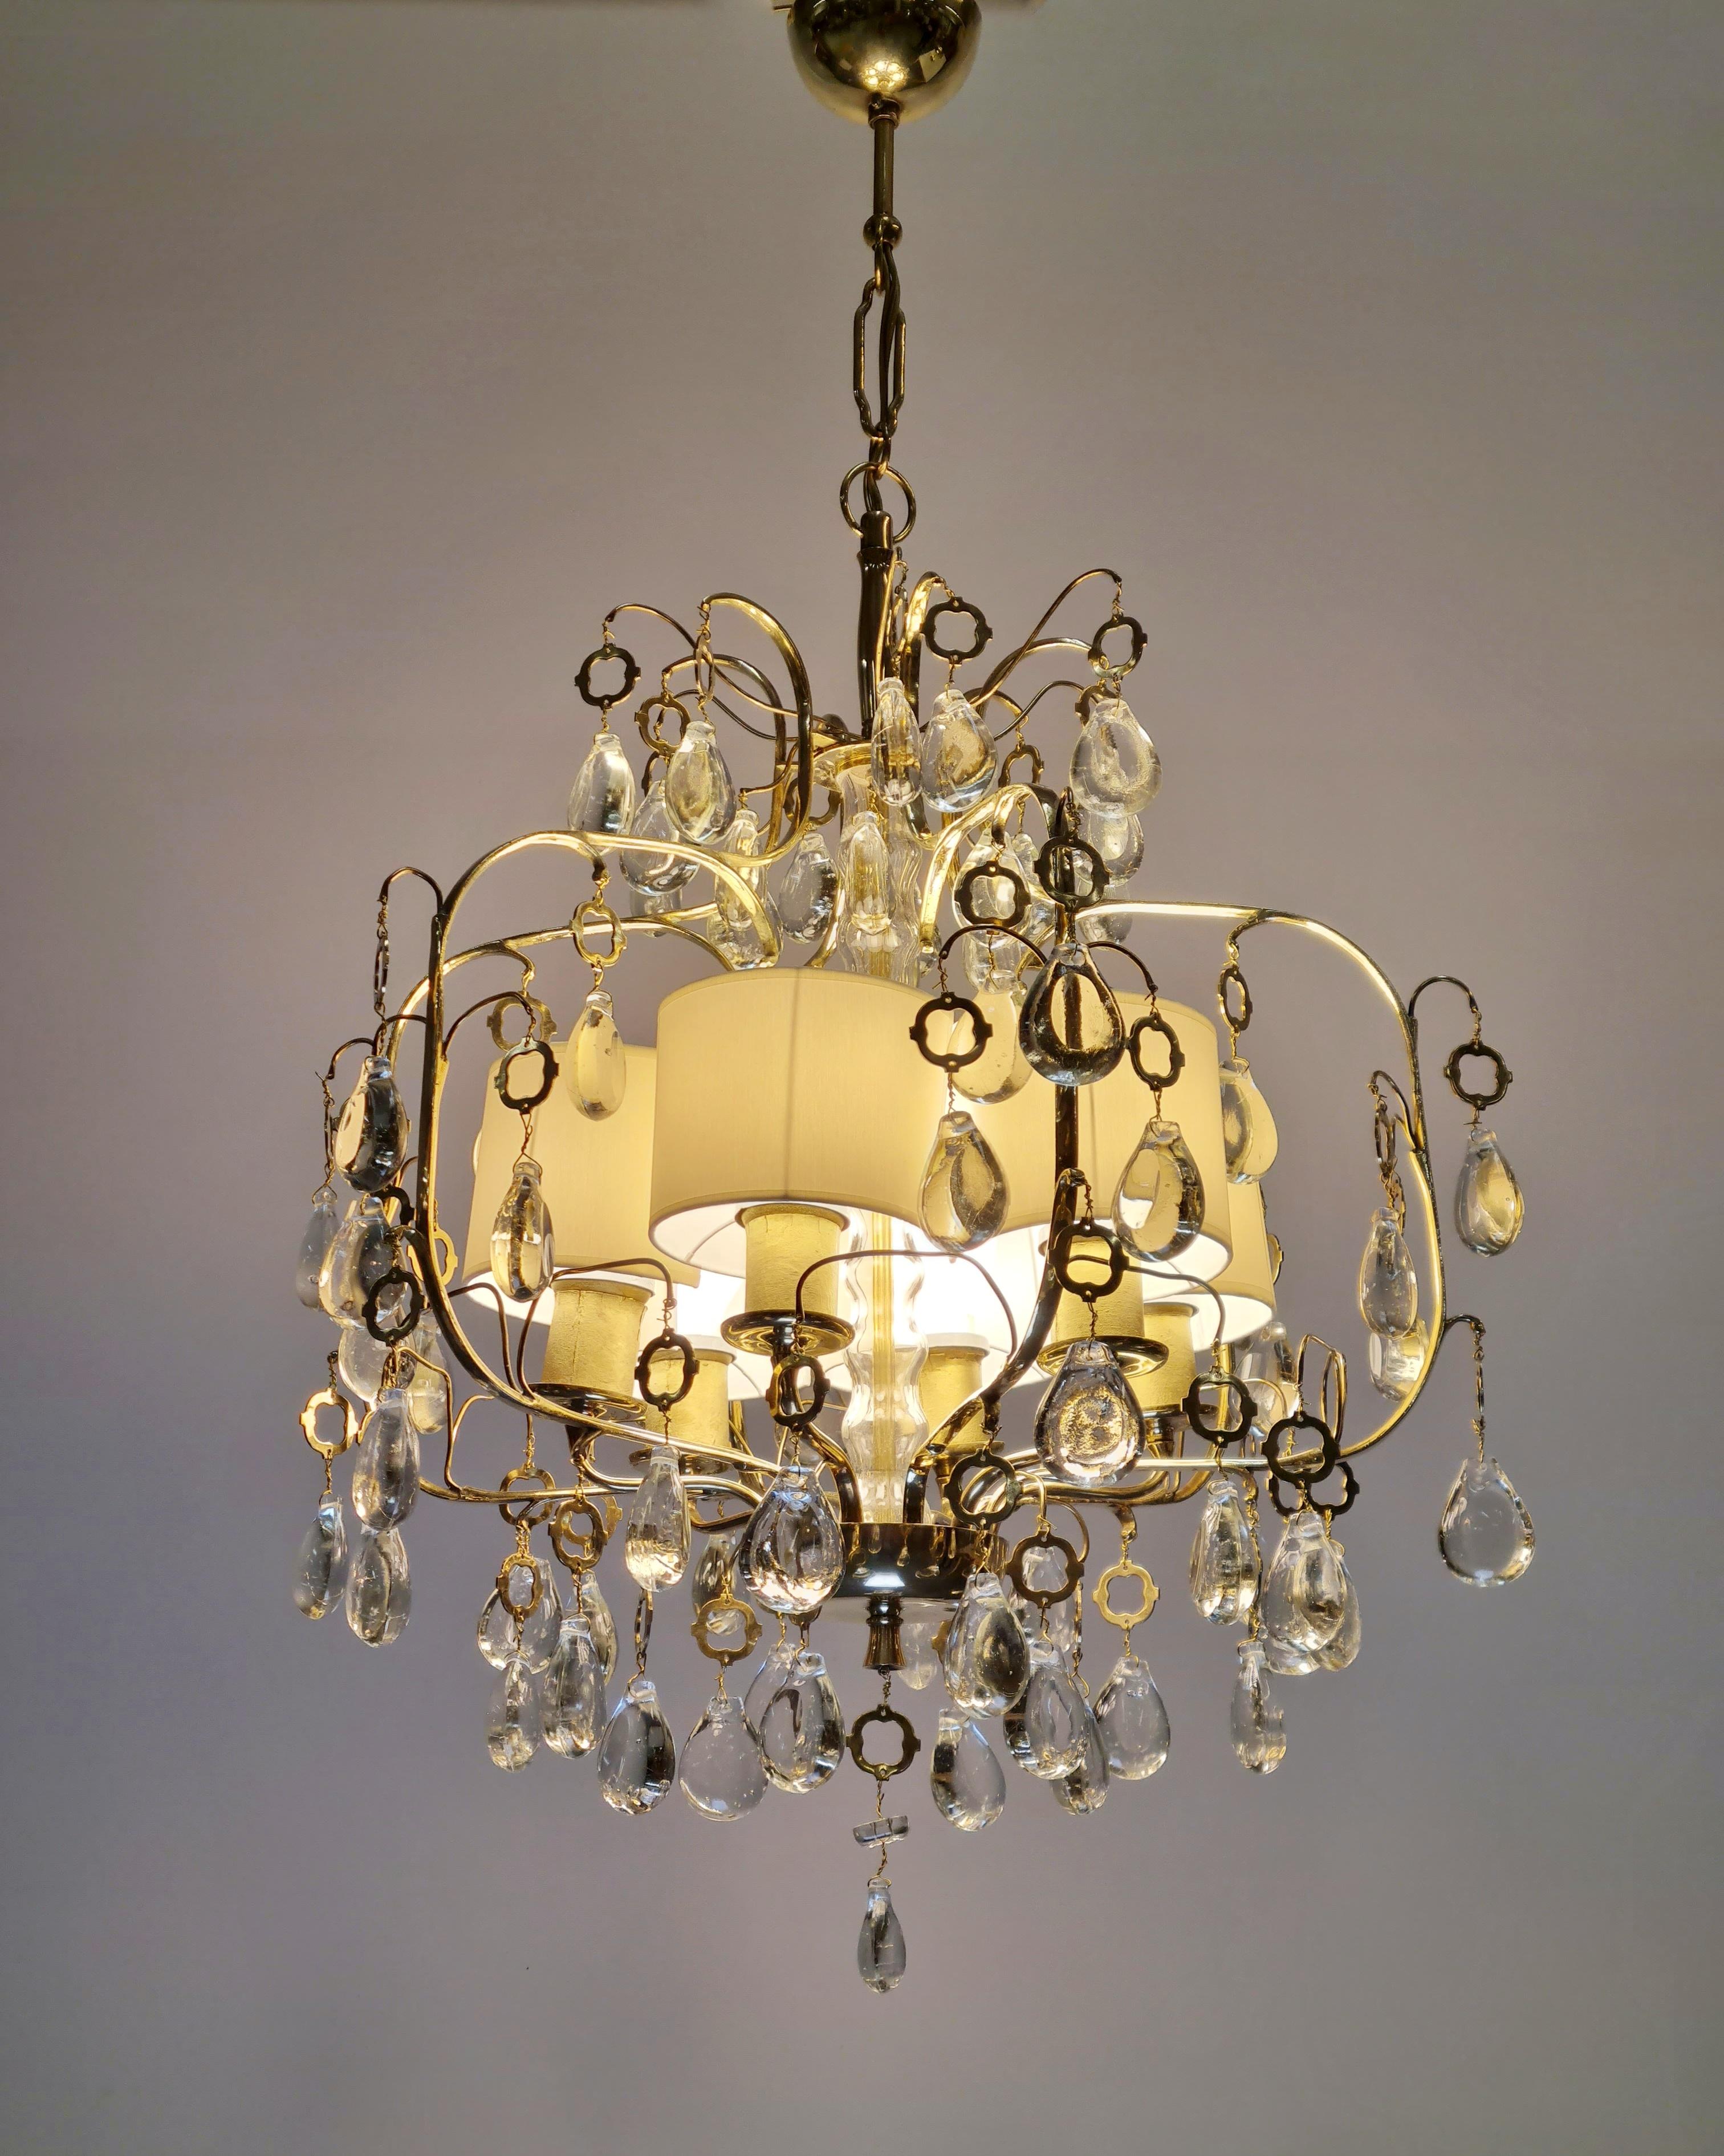 Scandinavian Modern Elegant Paavo Tynell Crystal Chandelier Model 1487 for Taito For Sale